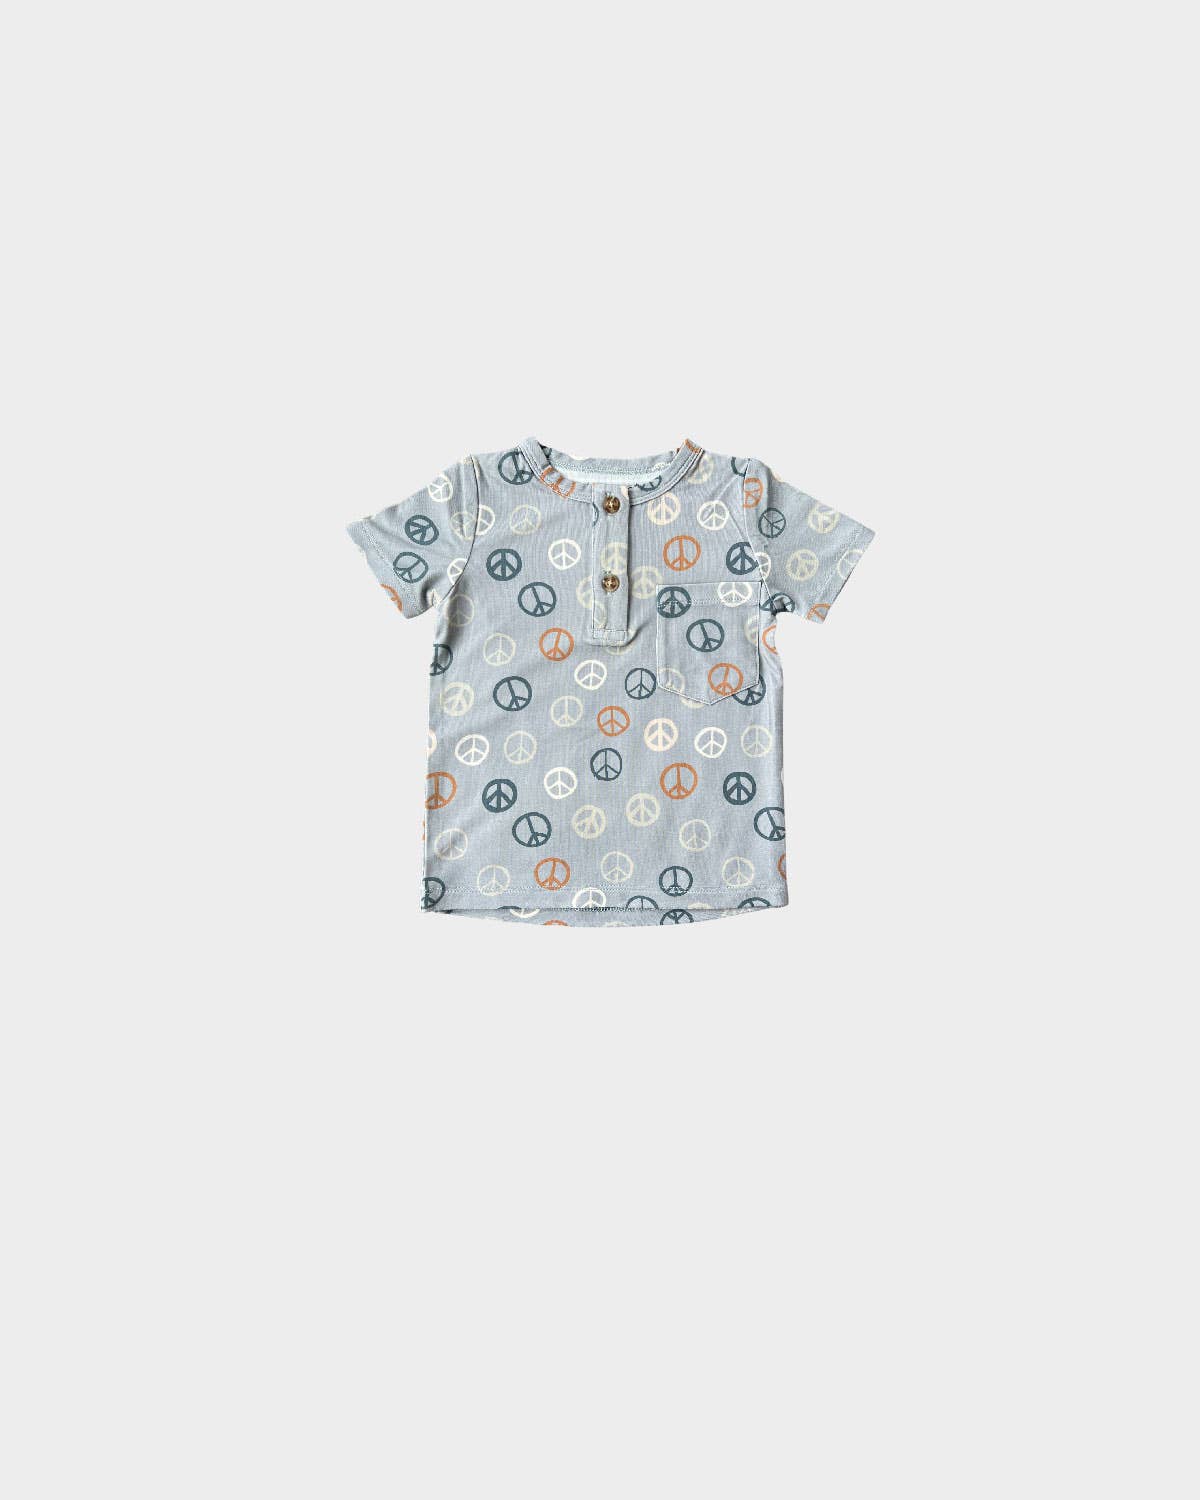 babysprouts clothing company - S24 D1: Boy's Henley Shirt in Peace